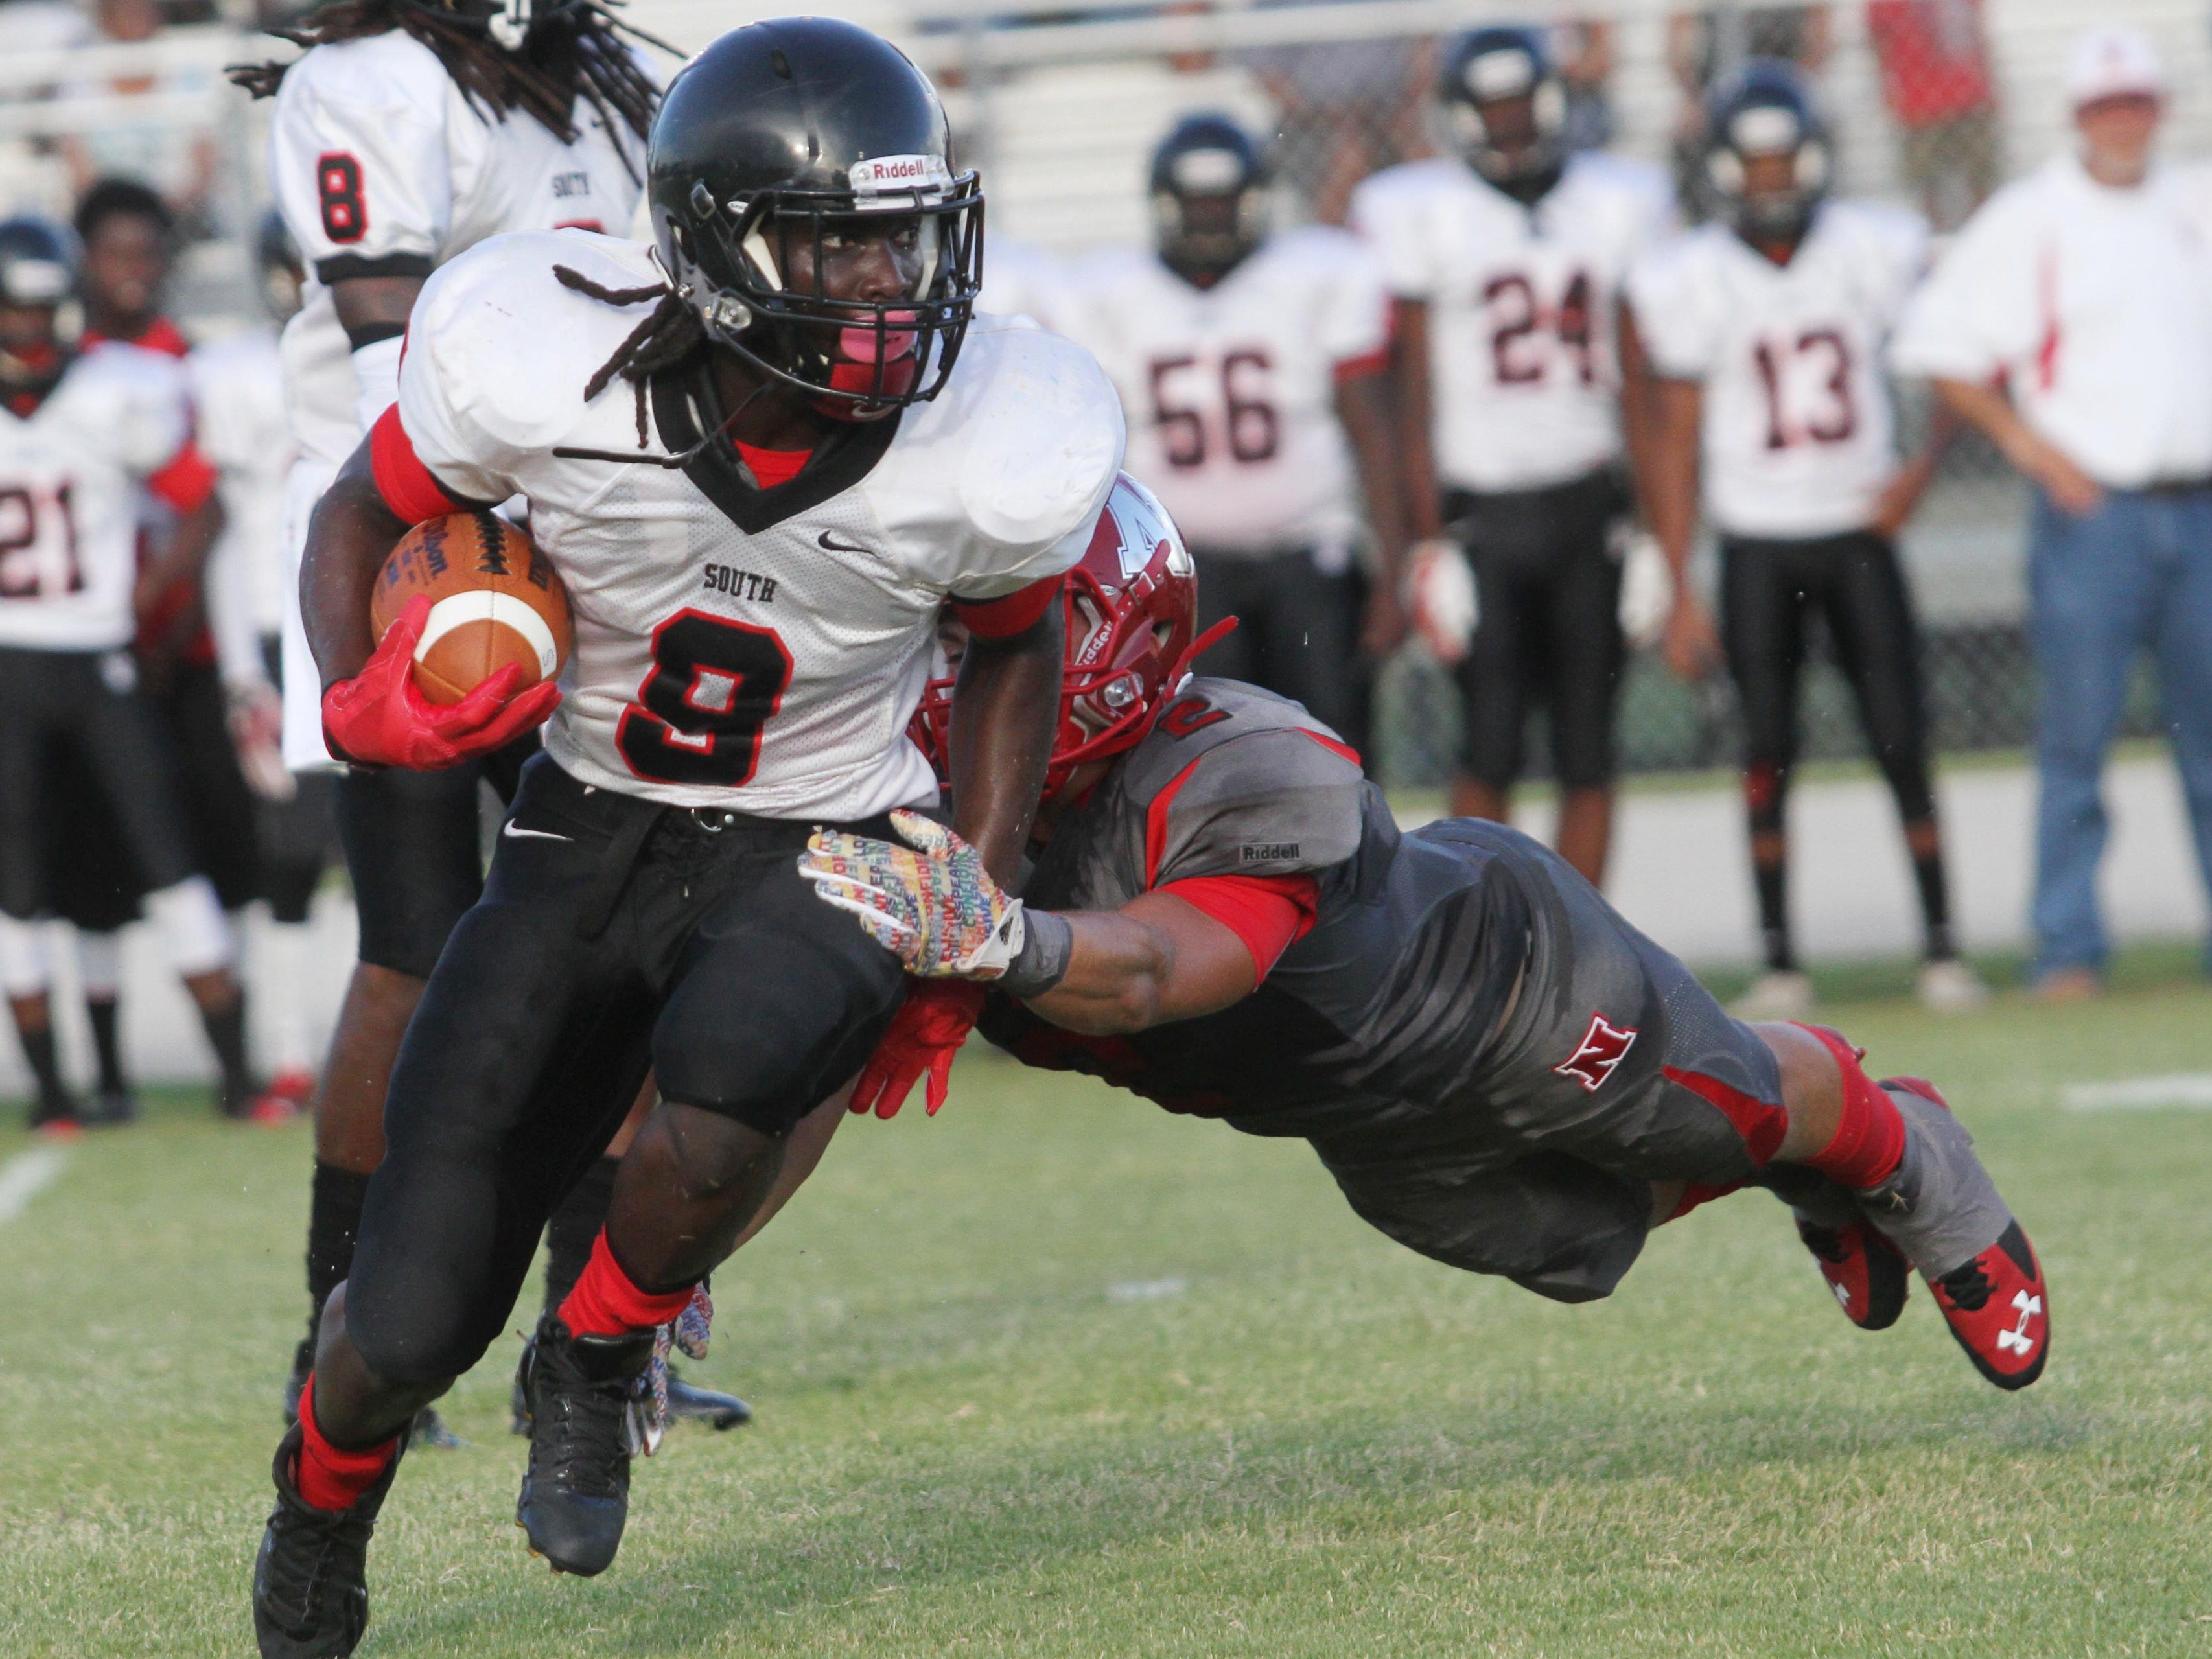 South Fort Myers’ E'Quan Dorris attempts to shake off North Fort Myers defender Zachary St. Amand during a preseason game at North Fort Myers High School on Thursday.